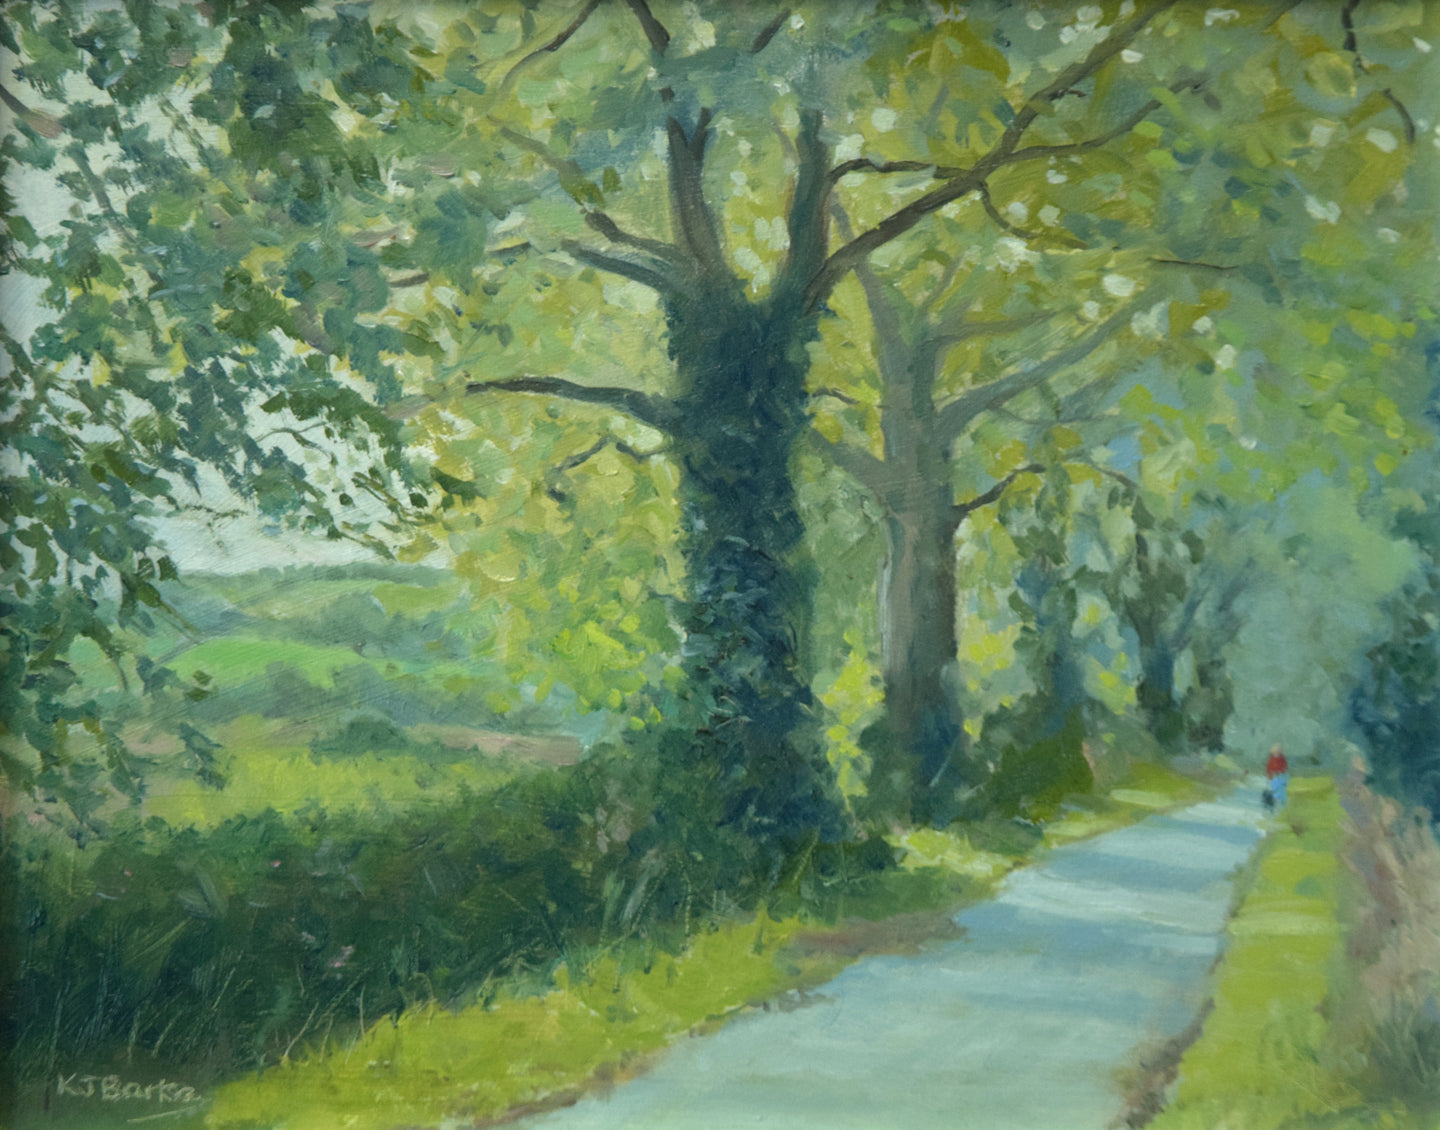 8 x 10 inch oil painting of the downhill road out of Lyndon towards Wing, through an avenue of Oak trees.